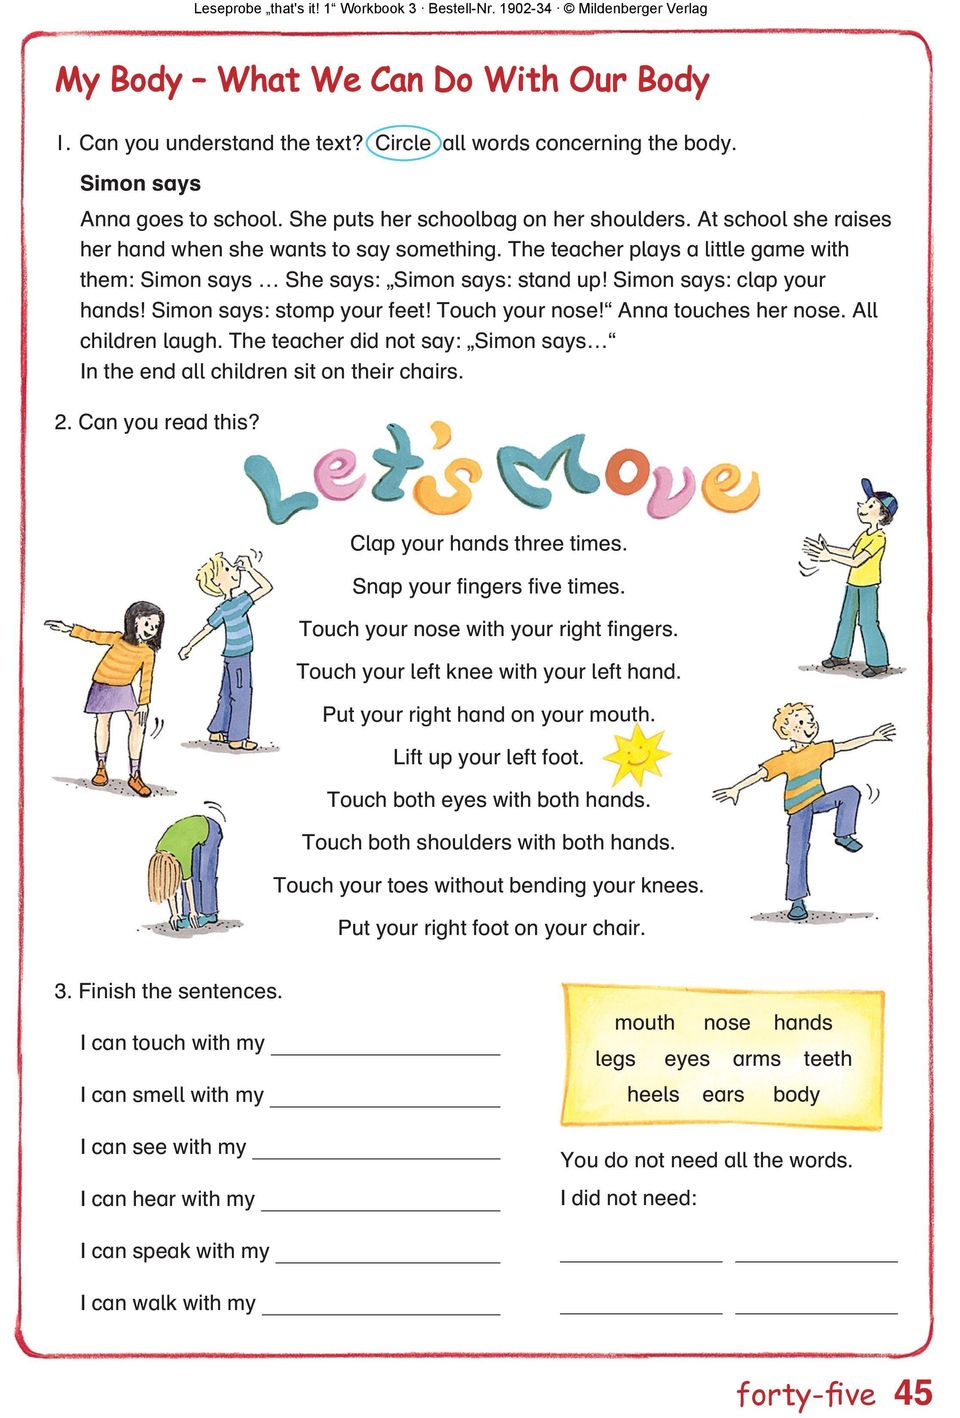 Simon says: stomp your feet! Touch your nose! Anna touches her nose. All children laugh. The teacher did not say: Simon says In the end all children sit on their chairs. 2. Can you read this?